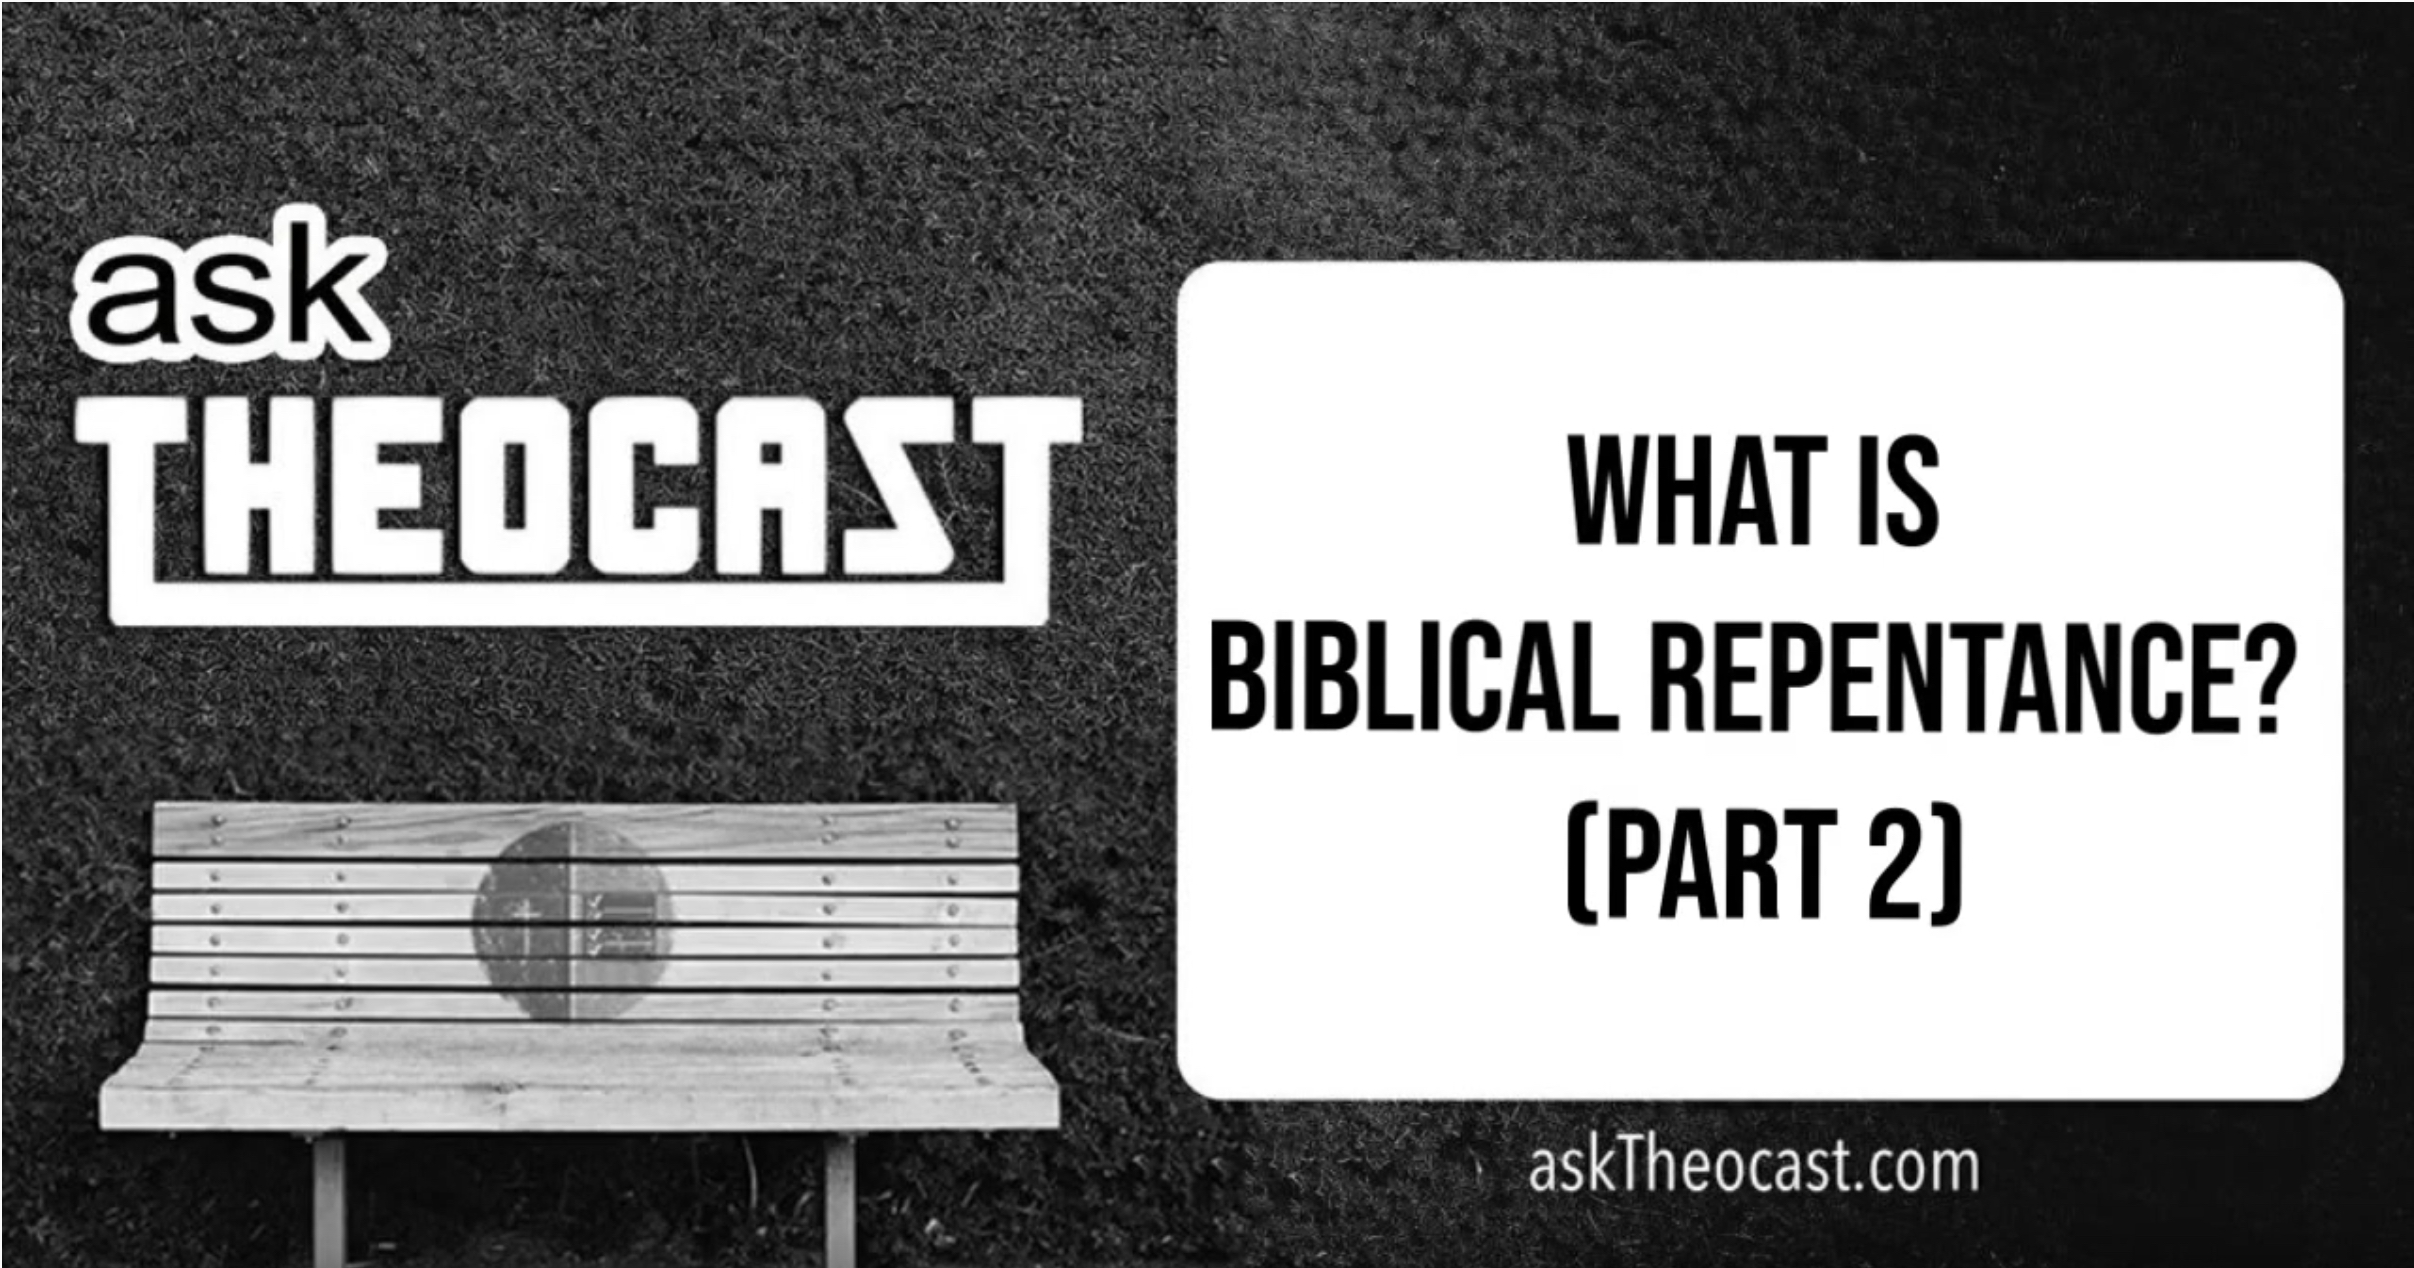 What Is Biblical Repentance (Part 2)?